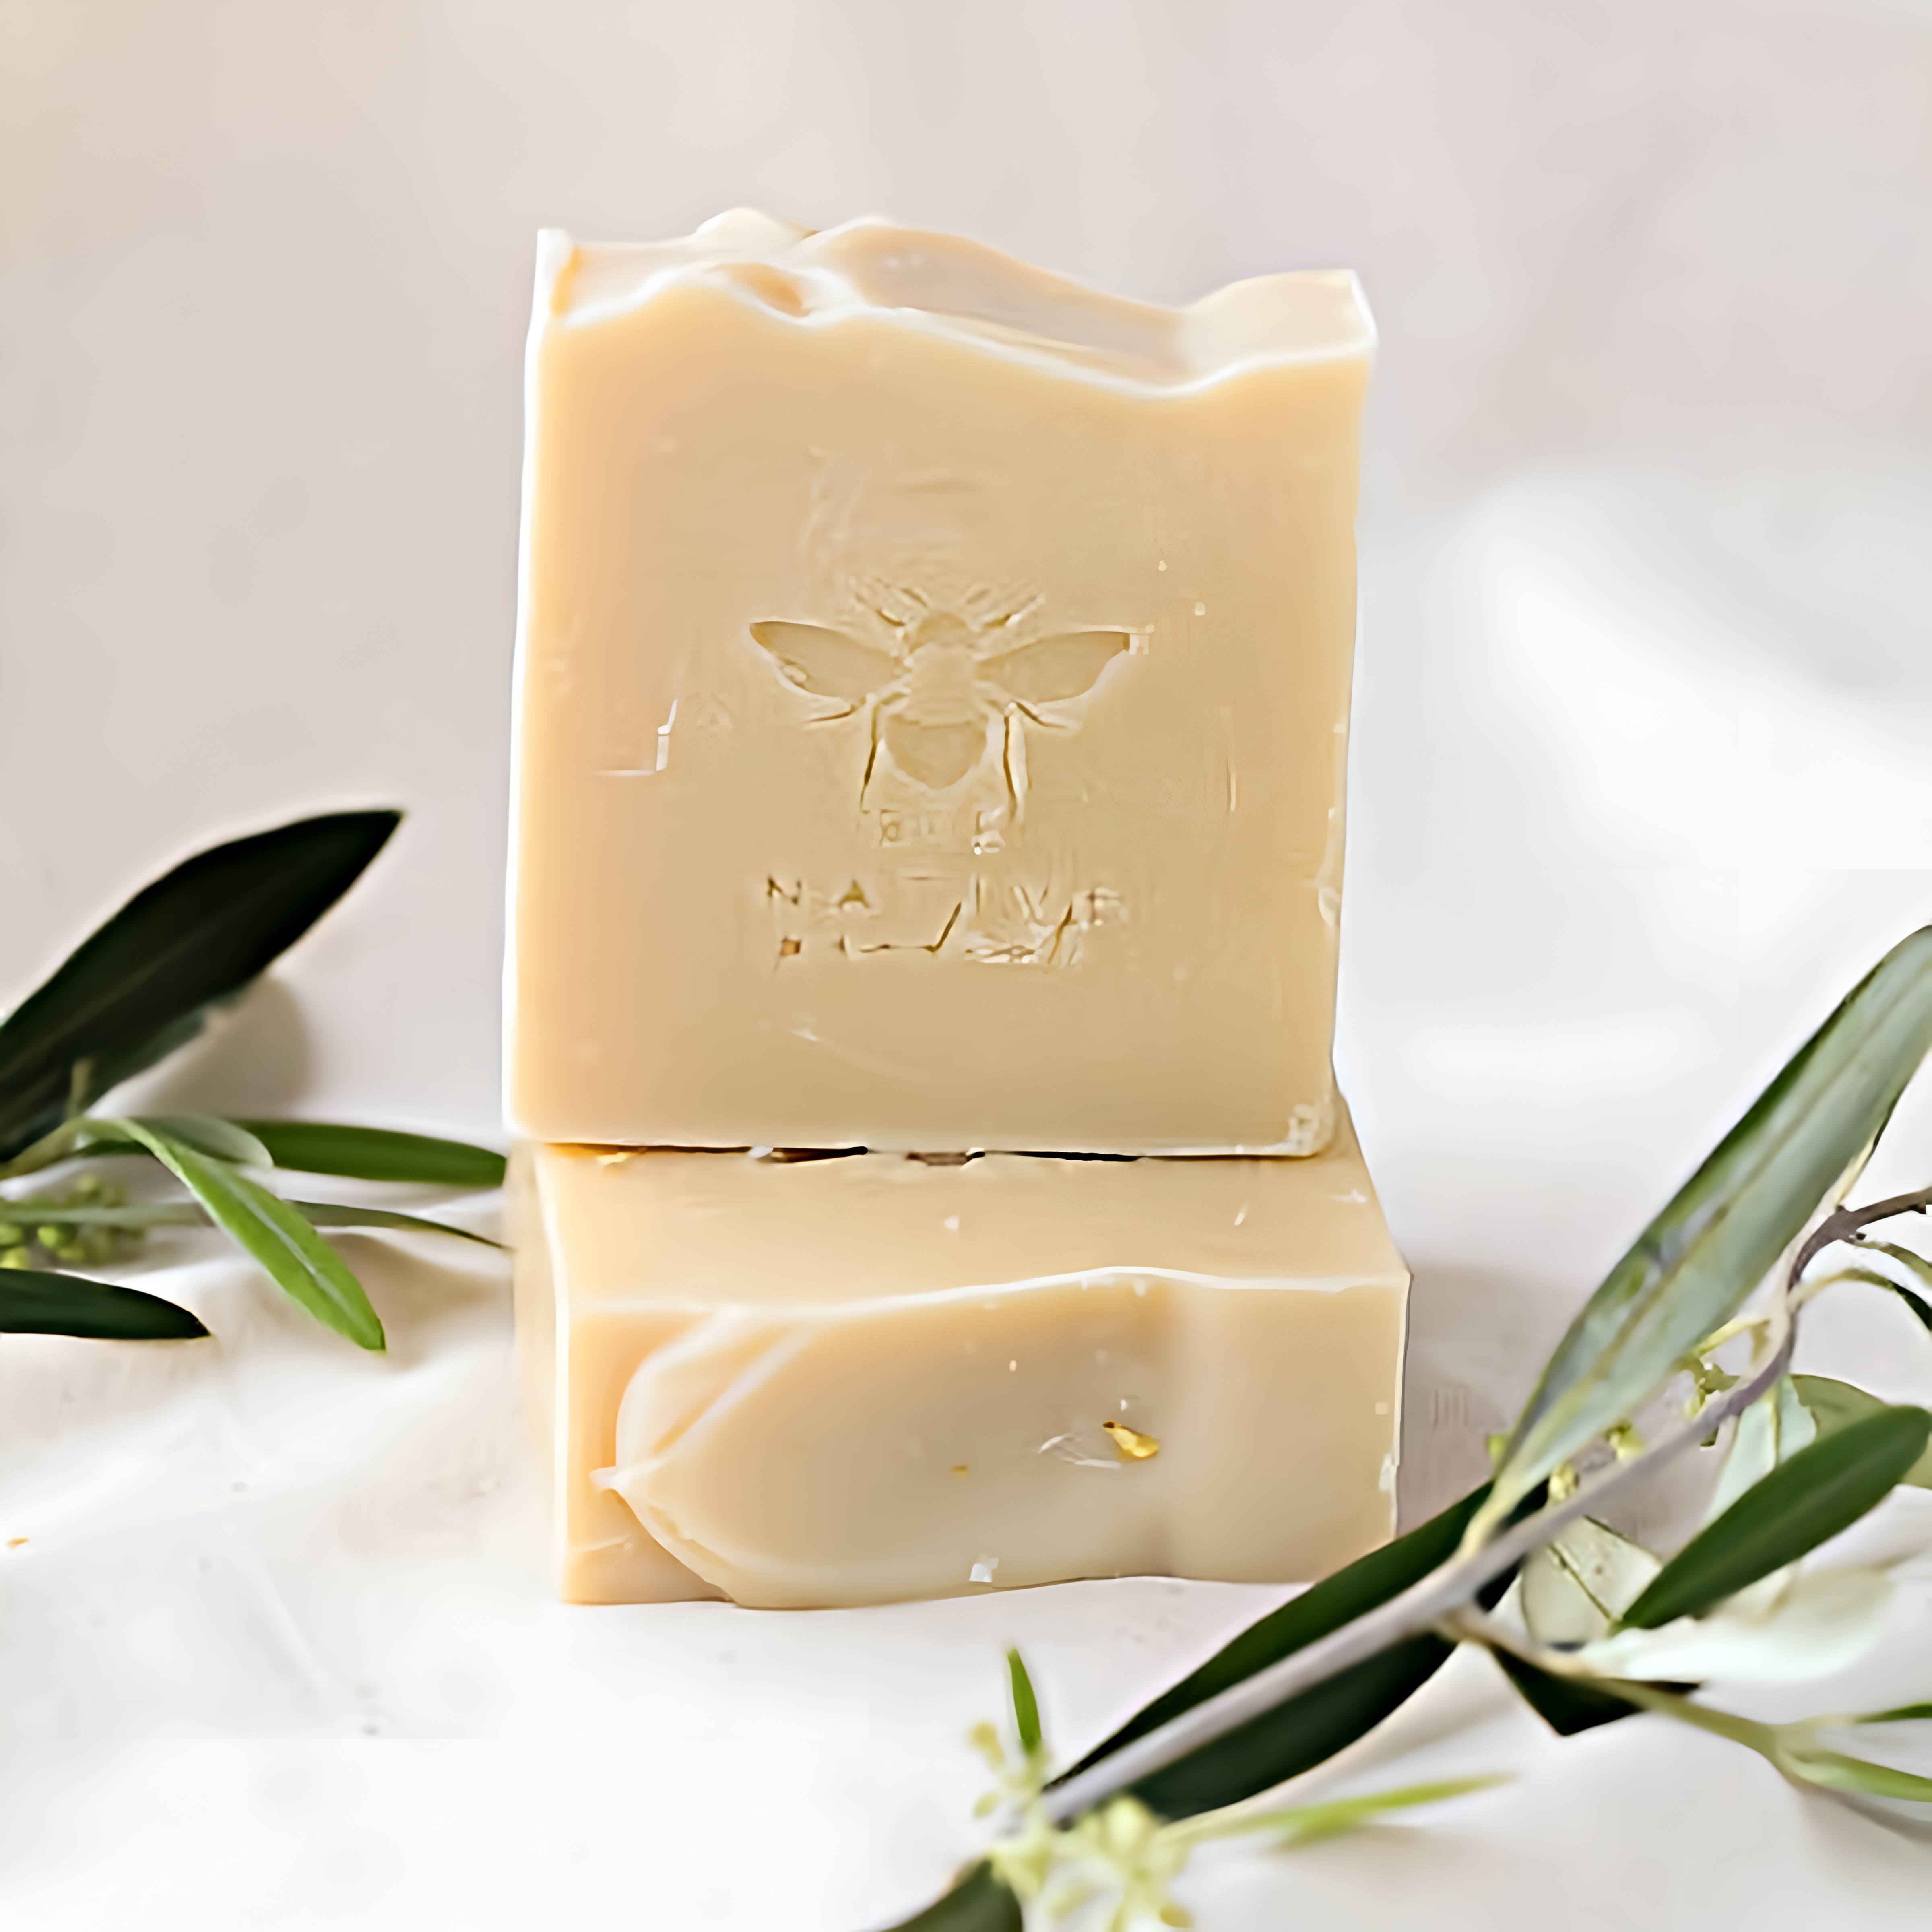 Tassie Pale Ale Beer Soap - All Natural Handmade In Tasmania -The Mountain Merchant -Bee Native